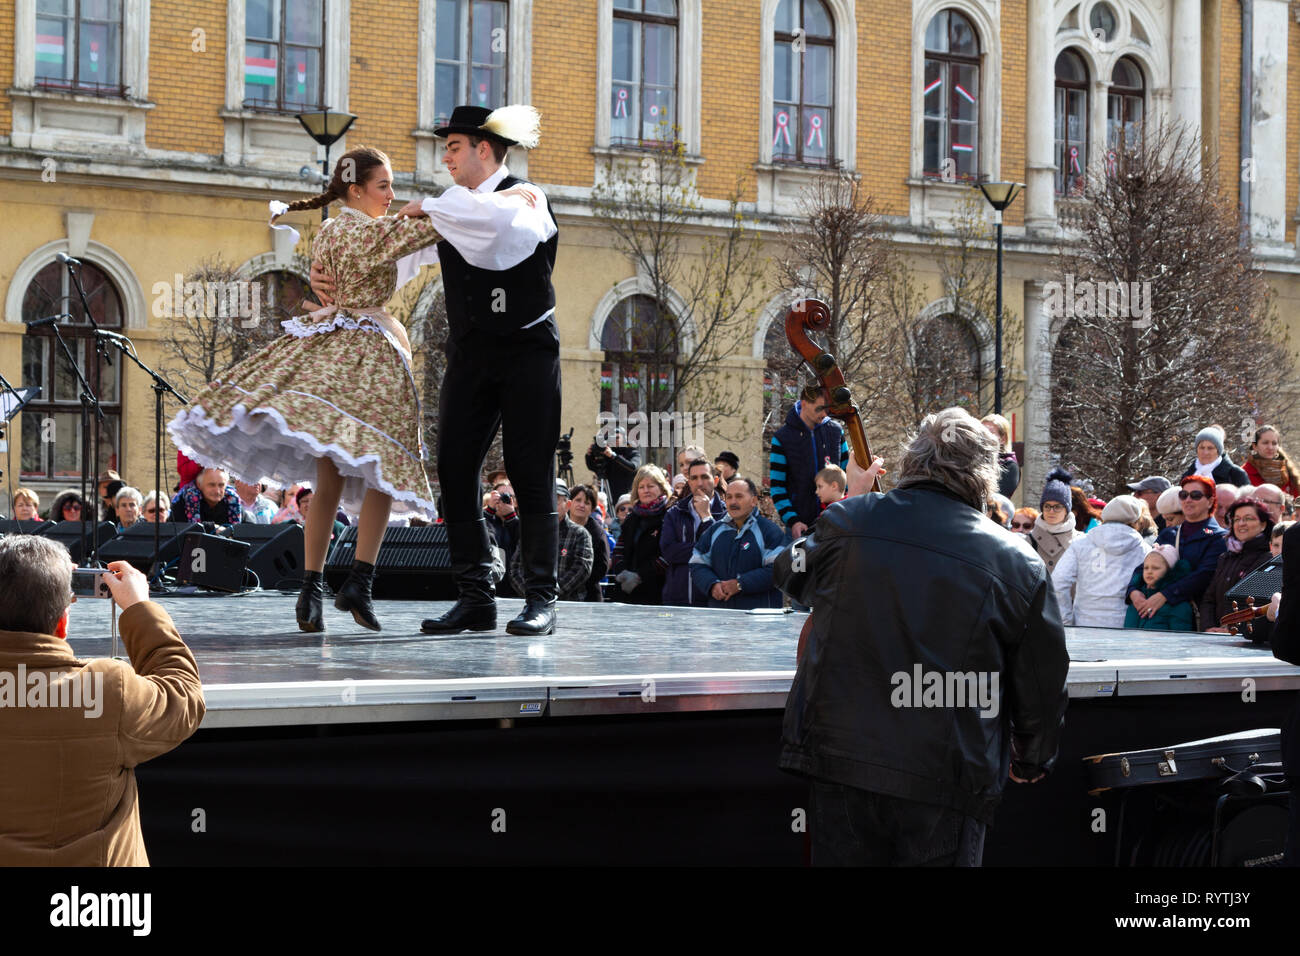 Sopron, Hungary. 15th Mar, 2019. A couple of folk dancers performs traditional Hungarian dances on stage at Petőfi Square, Sopron, Hungary. Feather grass (stipa) is sticked in the lad's hat as it was used in the old times. Credit: Wahavi/Alamy Live News Stock Photo